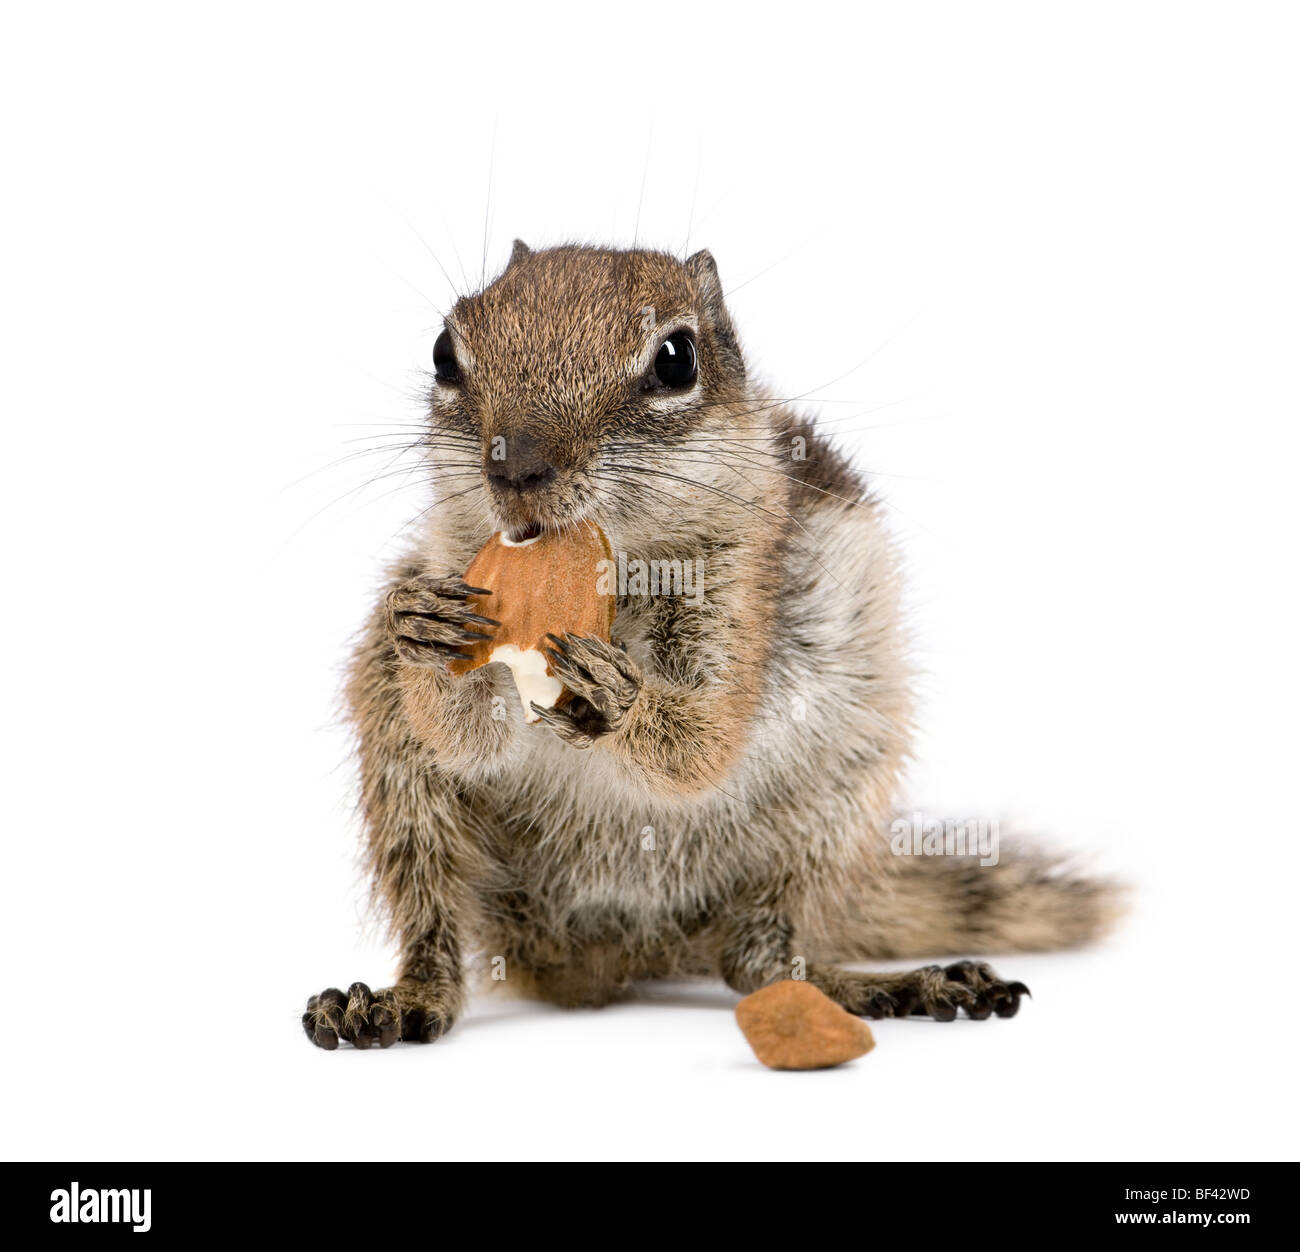 Ground squirrel eating nuts in front of white background, studio shot Stock Photo